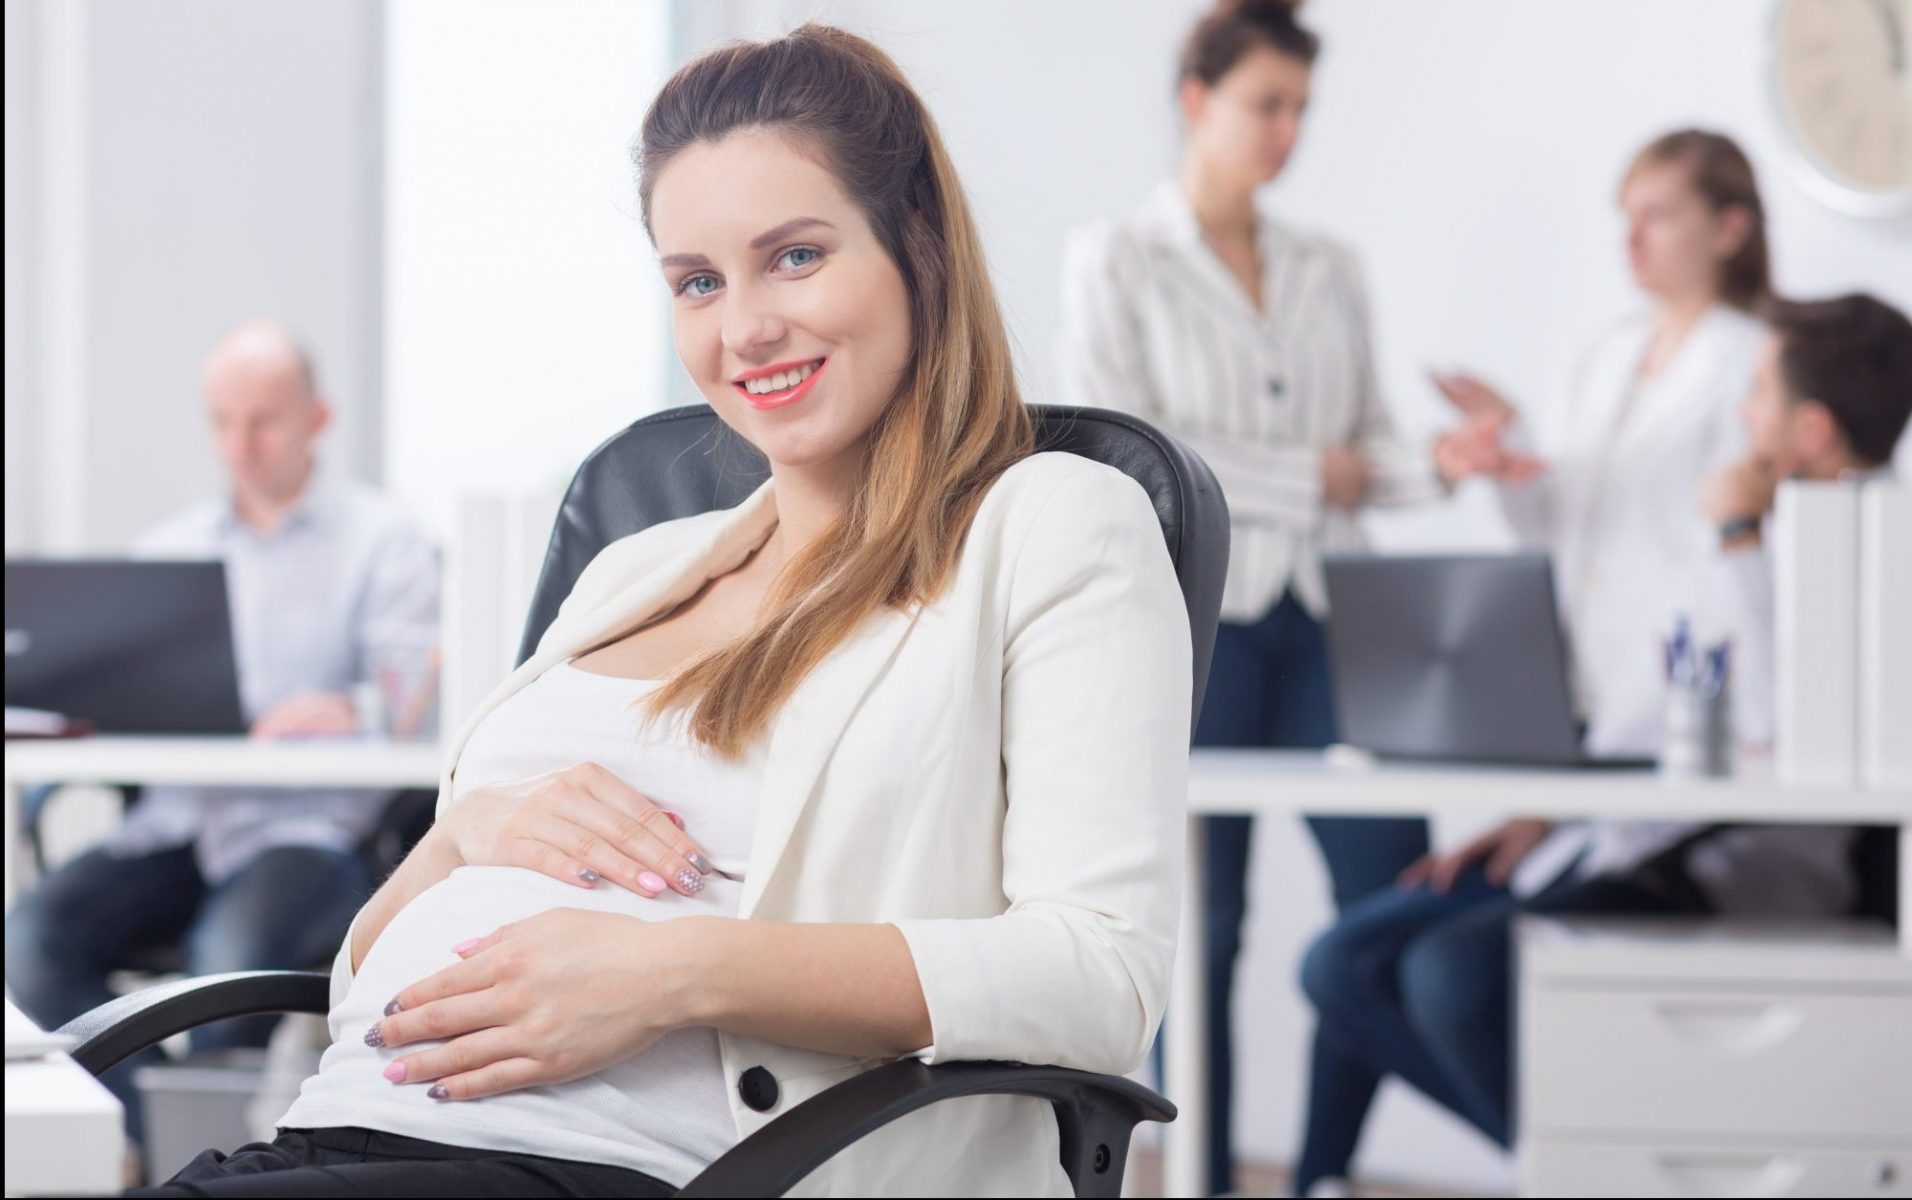 What Are Reasonable Accommodations for Pregnant Employees?